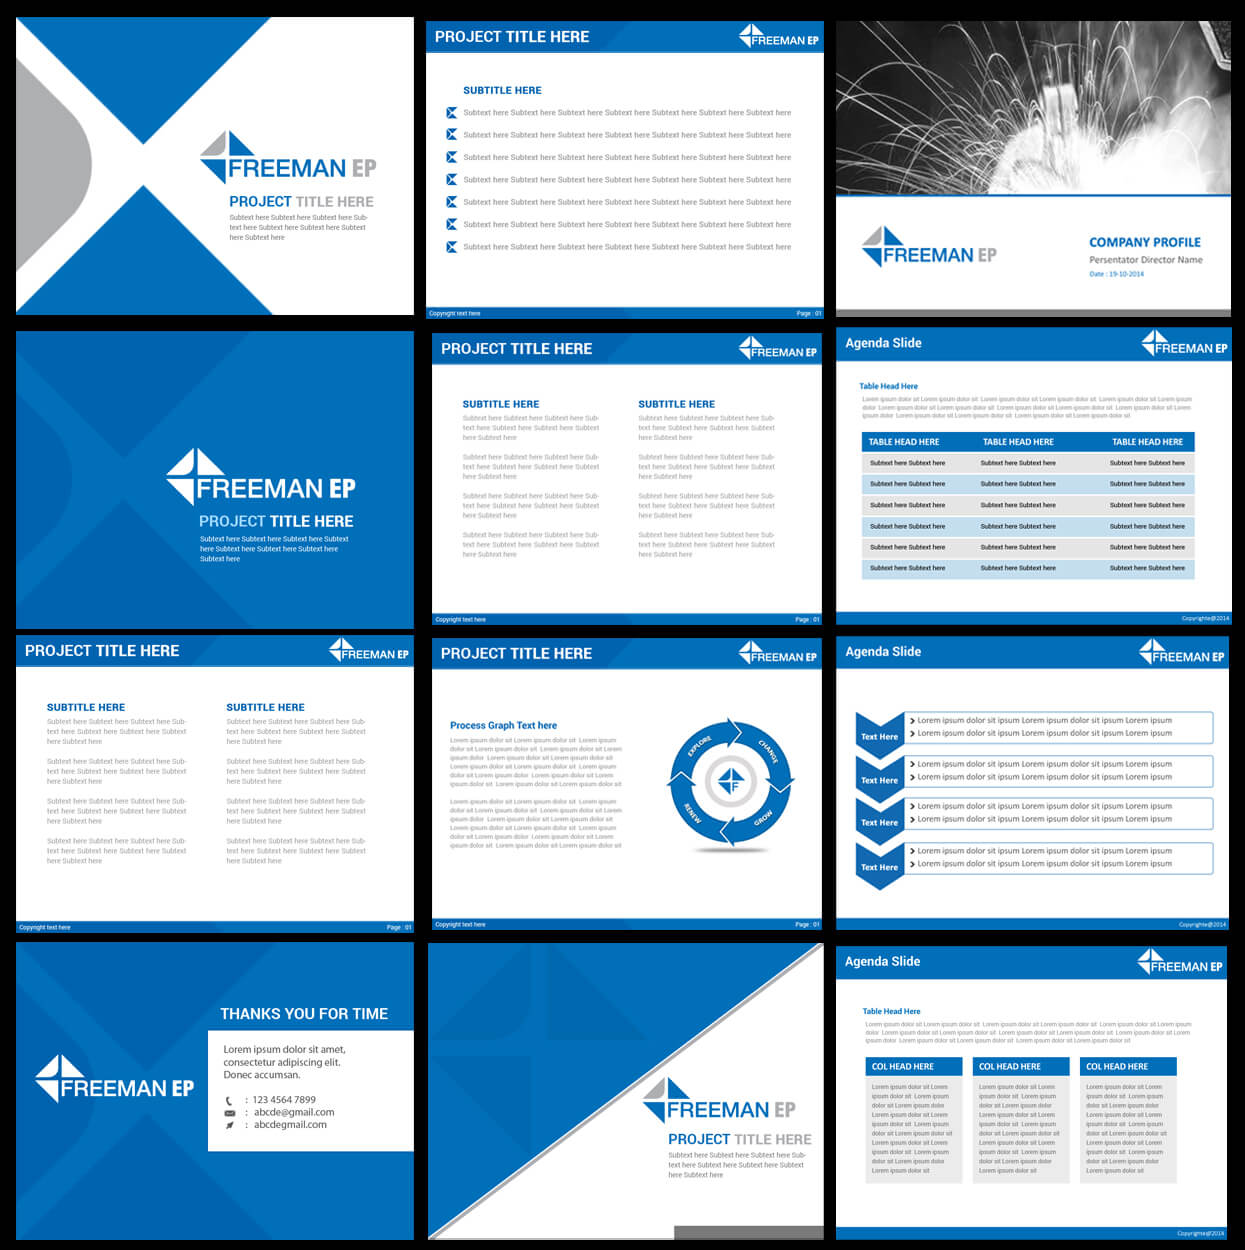 Powerpoint Presentation Design Templates Download Are Stored Intended For Where Are Powerpoint Templates Stored